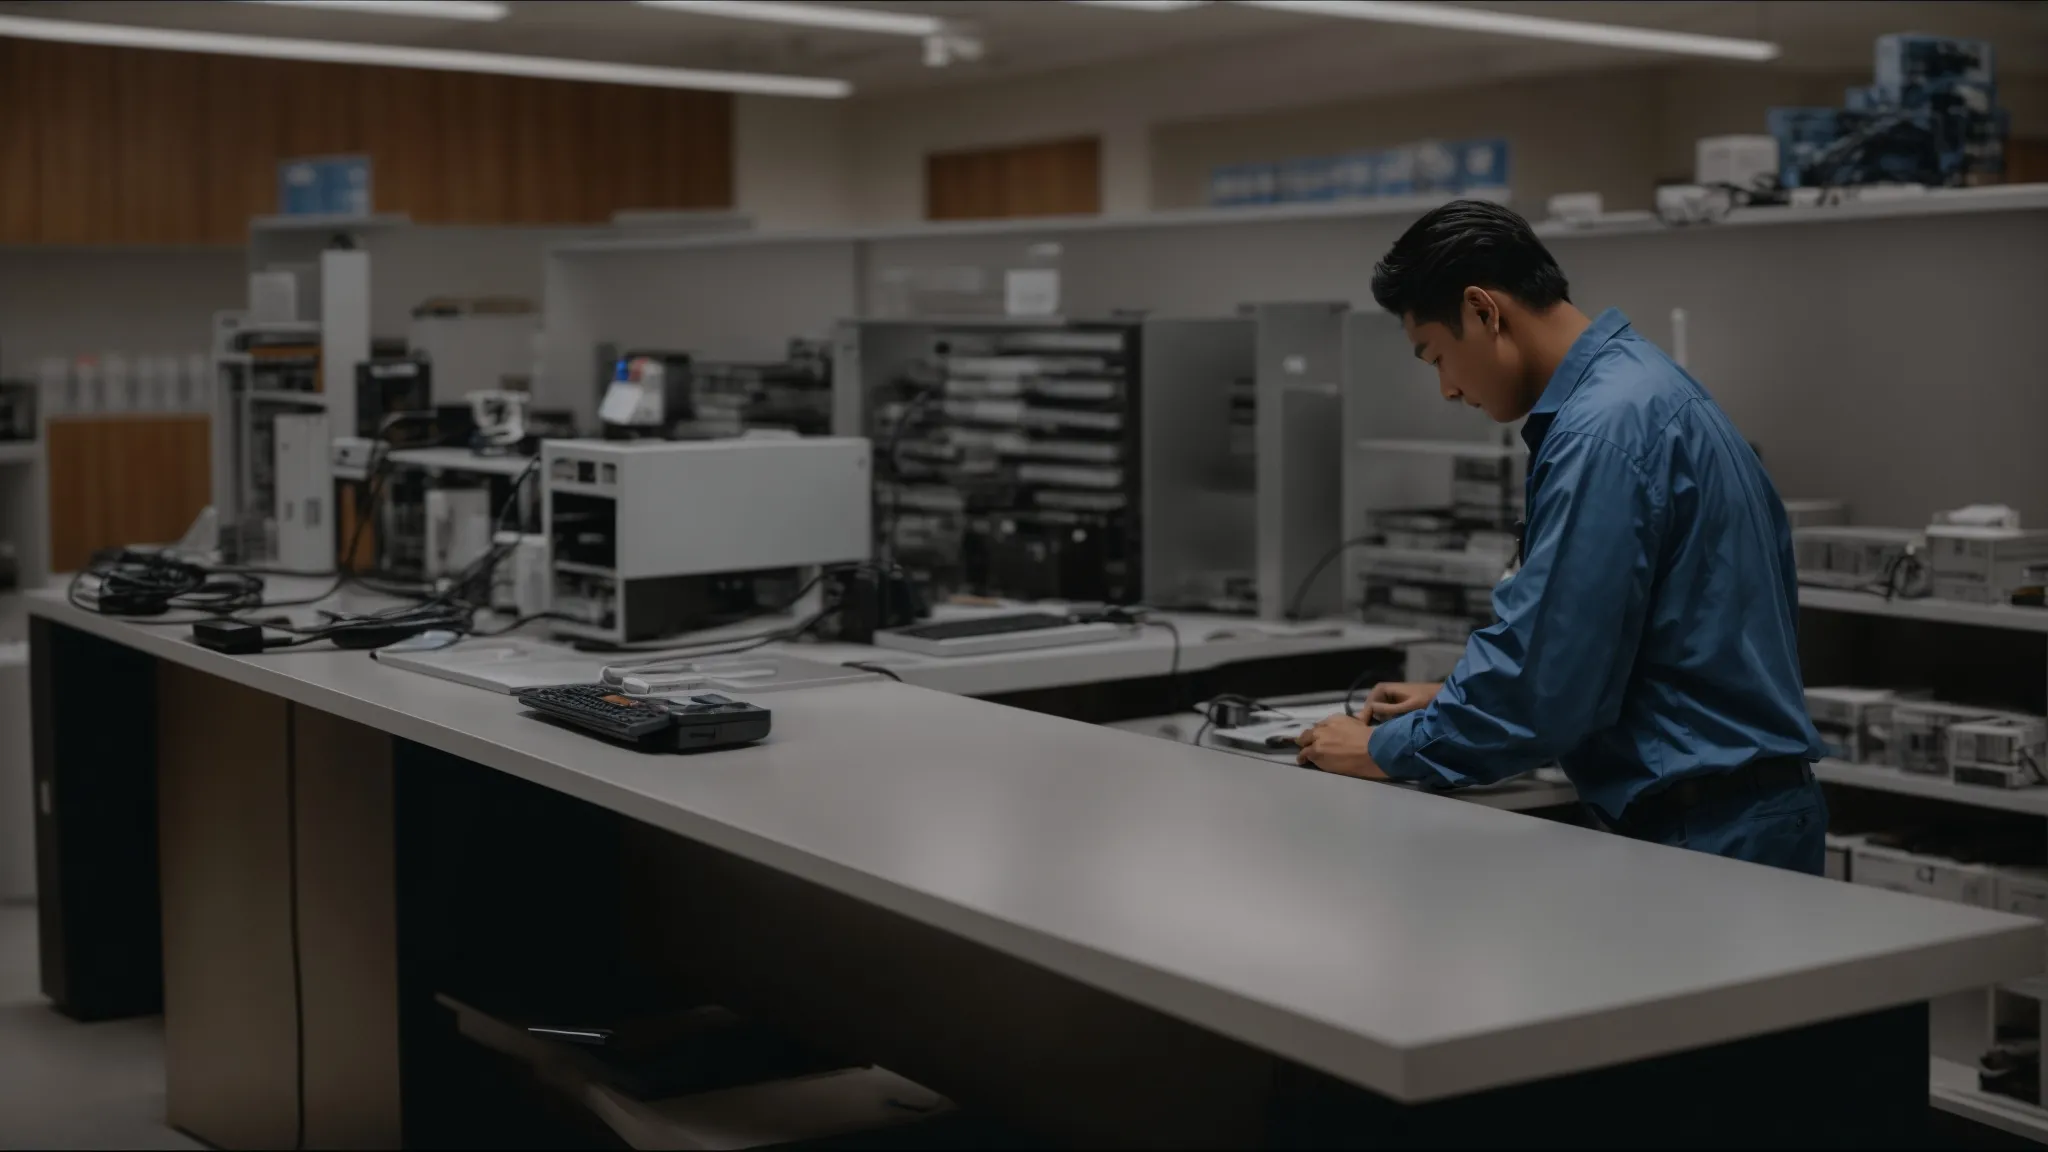 a person stands at a computer repair service counter as a technician evaluates a computer behind the desk.